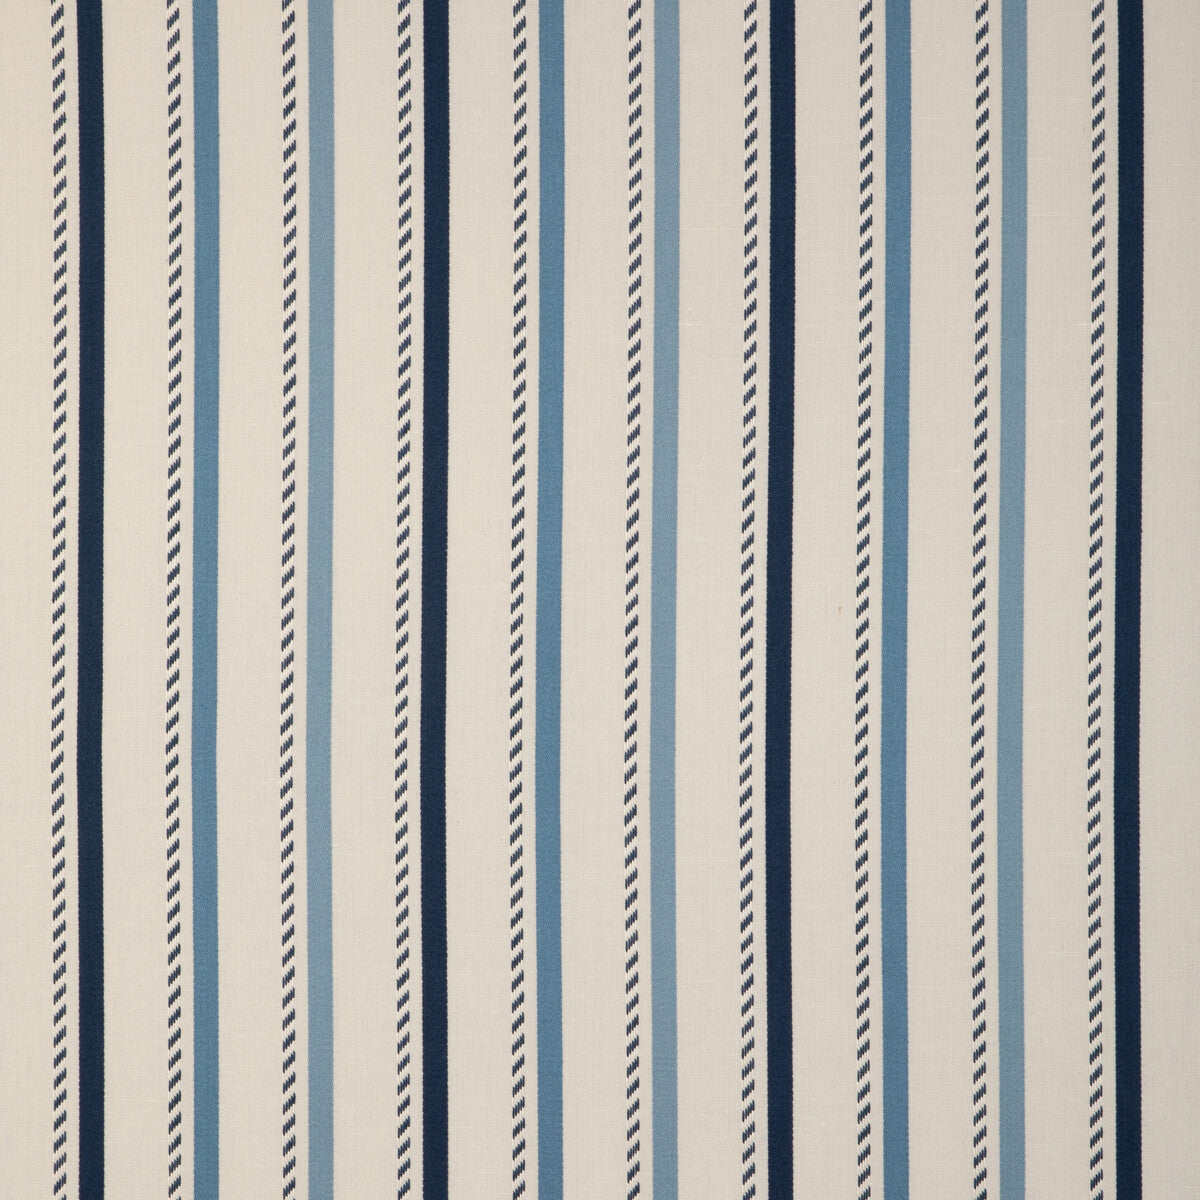 Buxton Stripe fabric in navy/sky color - pattern 2023106.550.0 - by Lee Jofa in the Highfield Stripes And Plaids collection